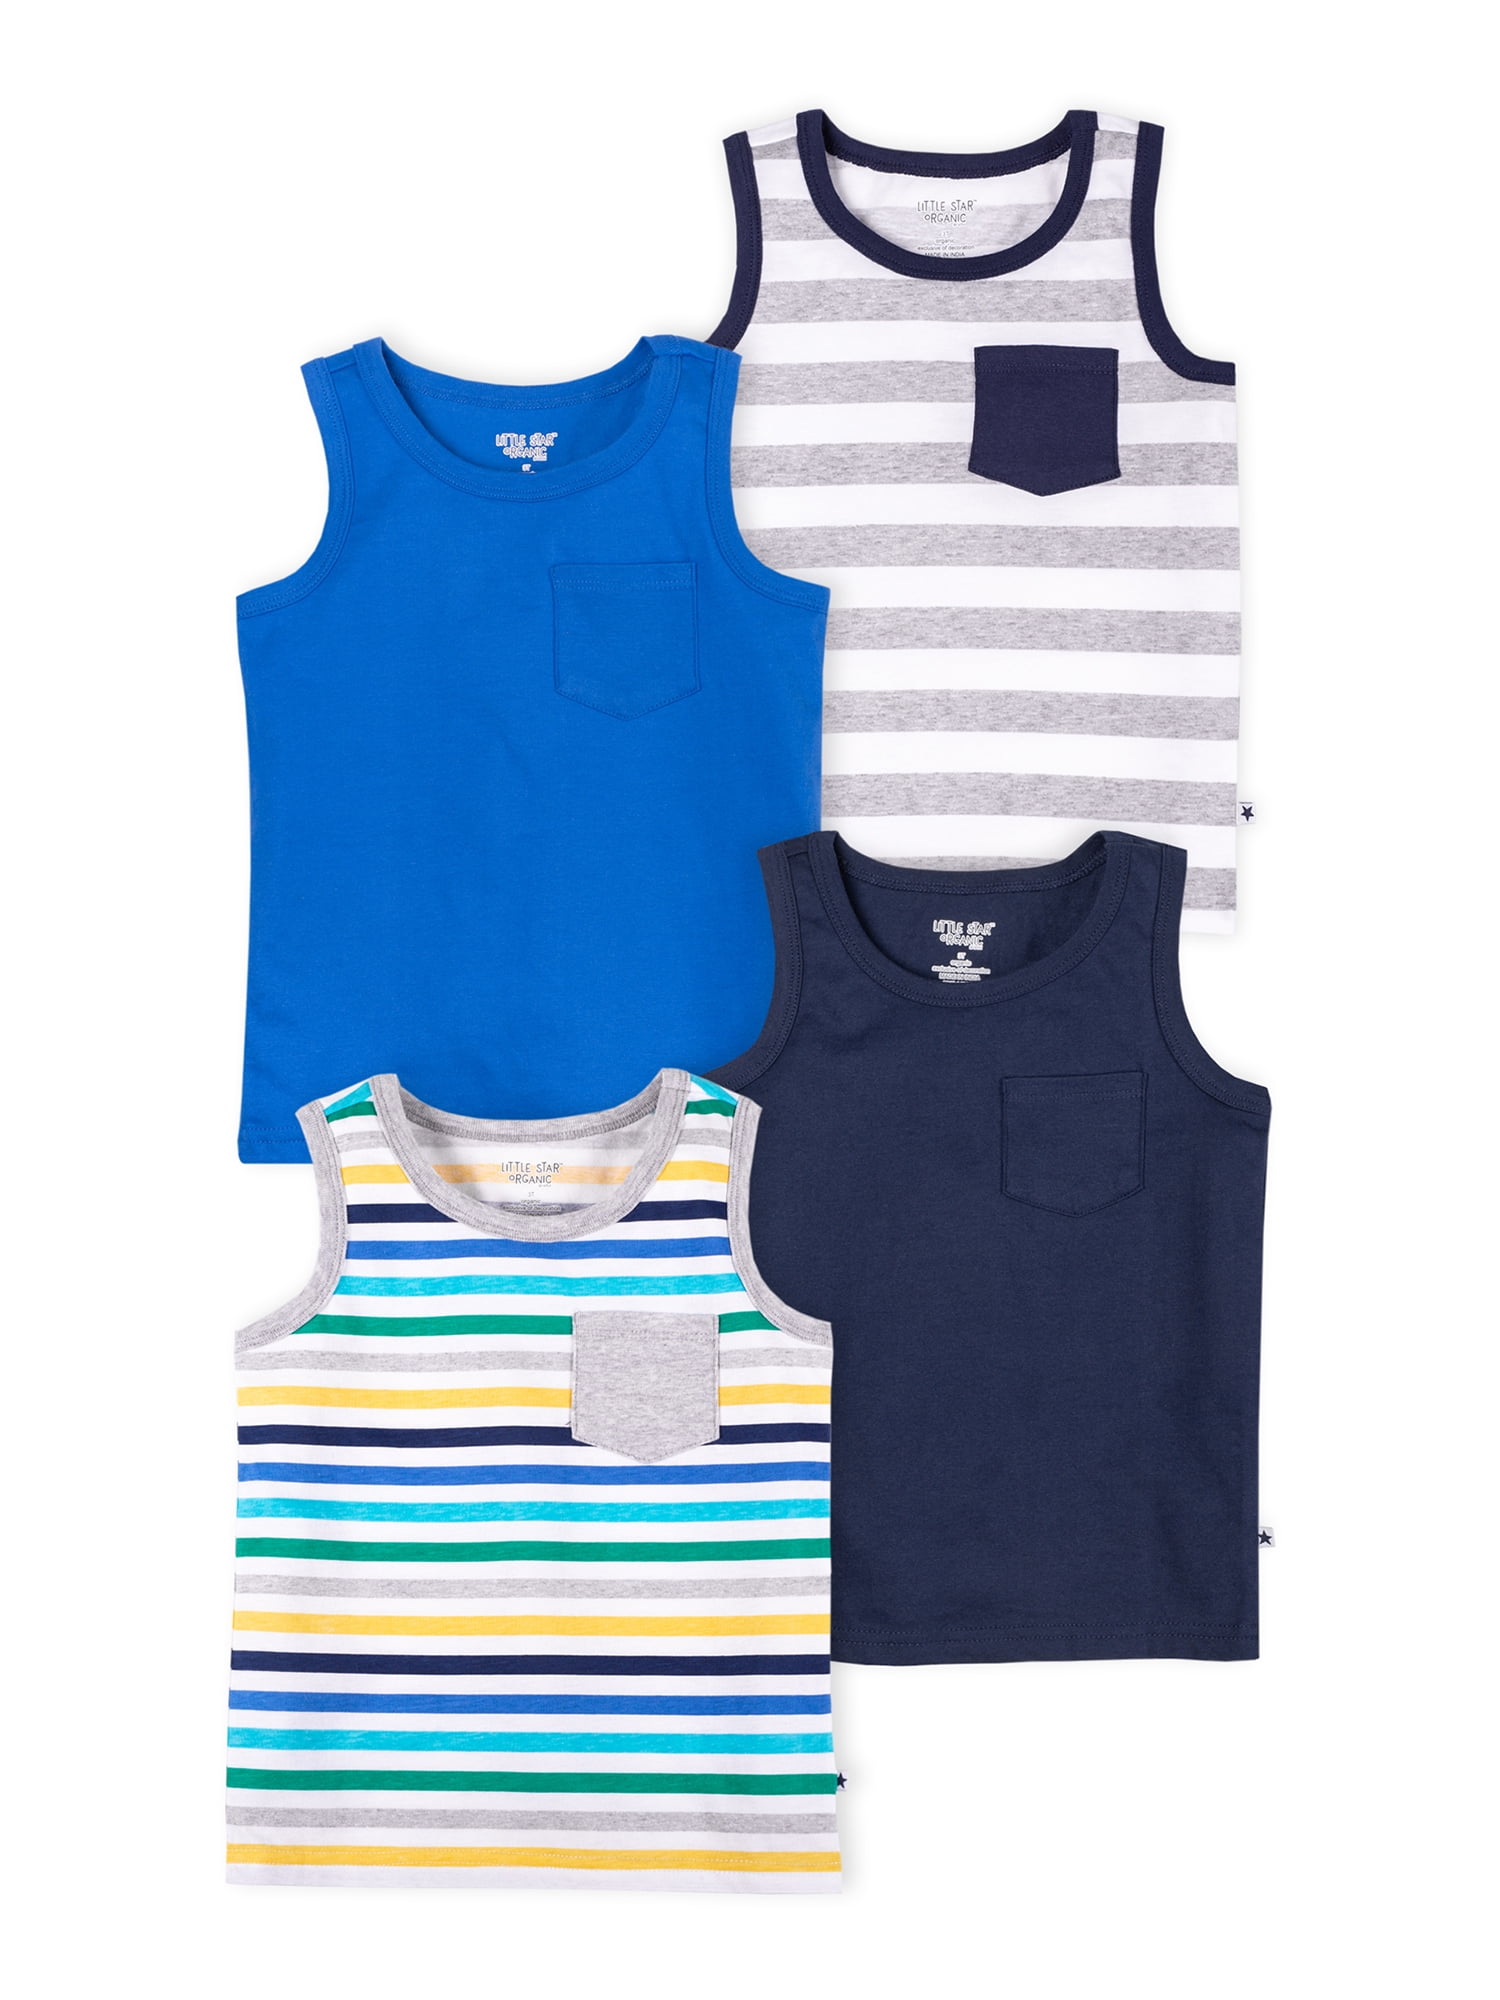 Z-Chen 4 Pack of Kids Boys Sleeveless Vest Top Undershirts Tank Tops Age 3-7 Years 